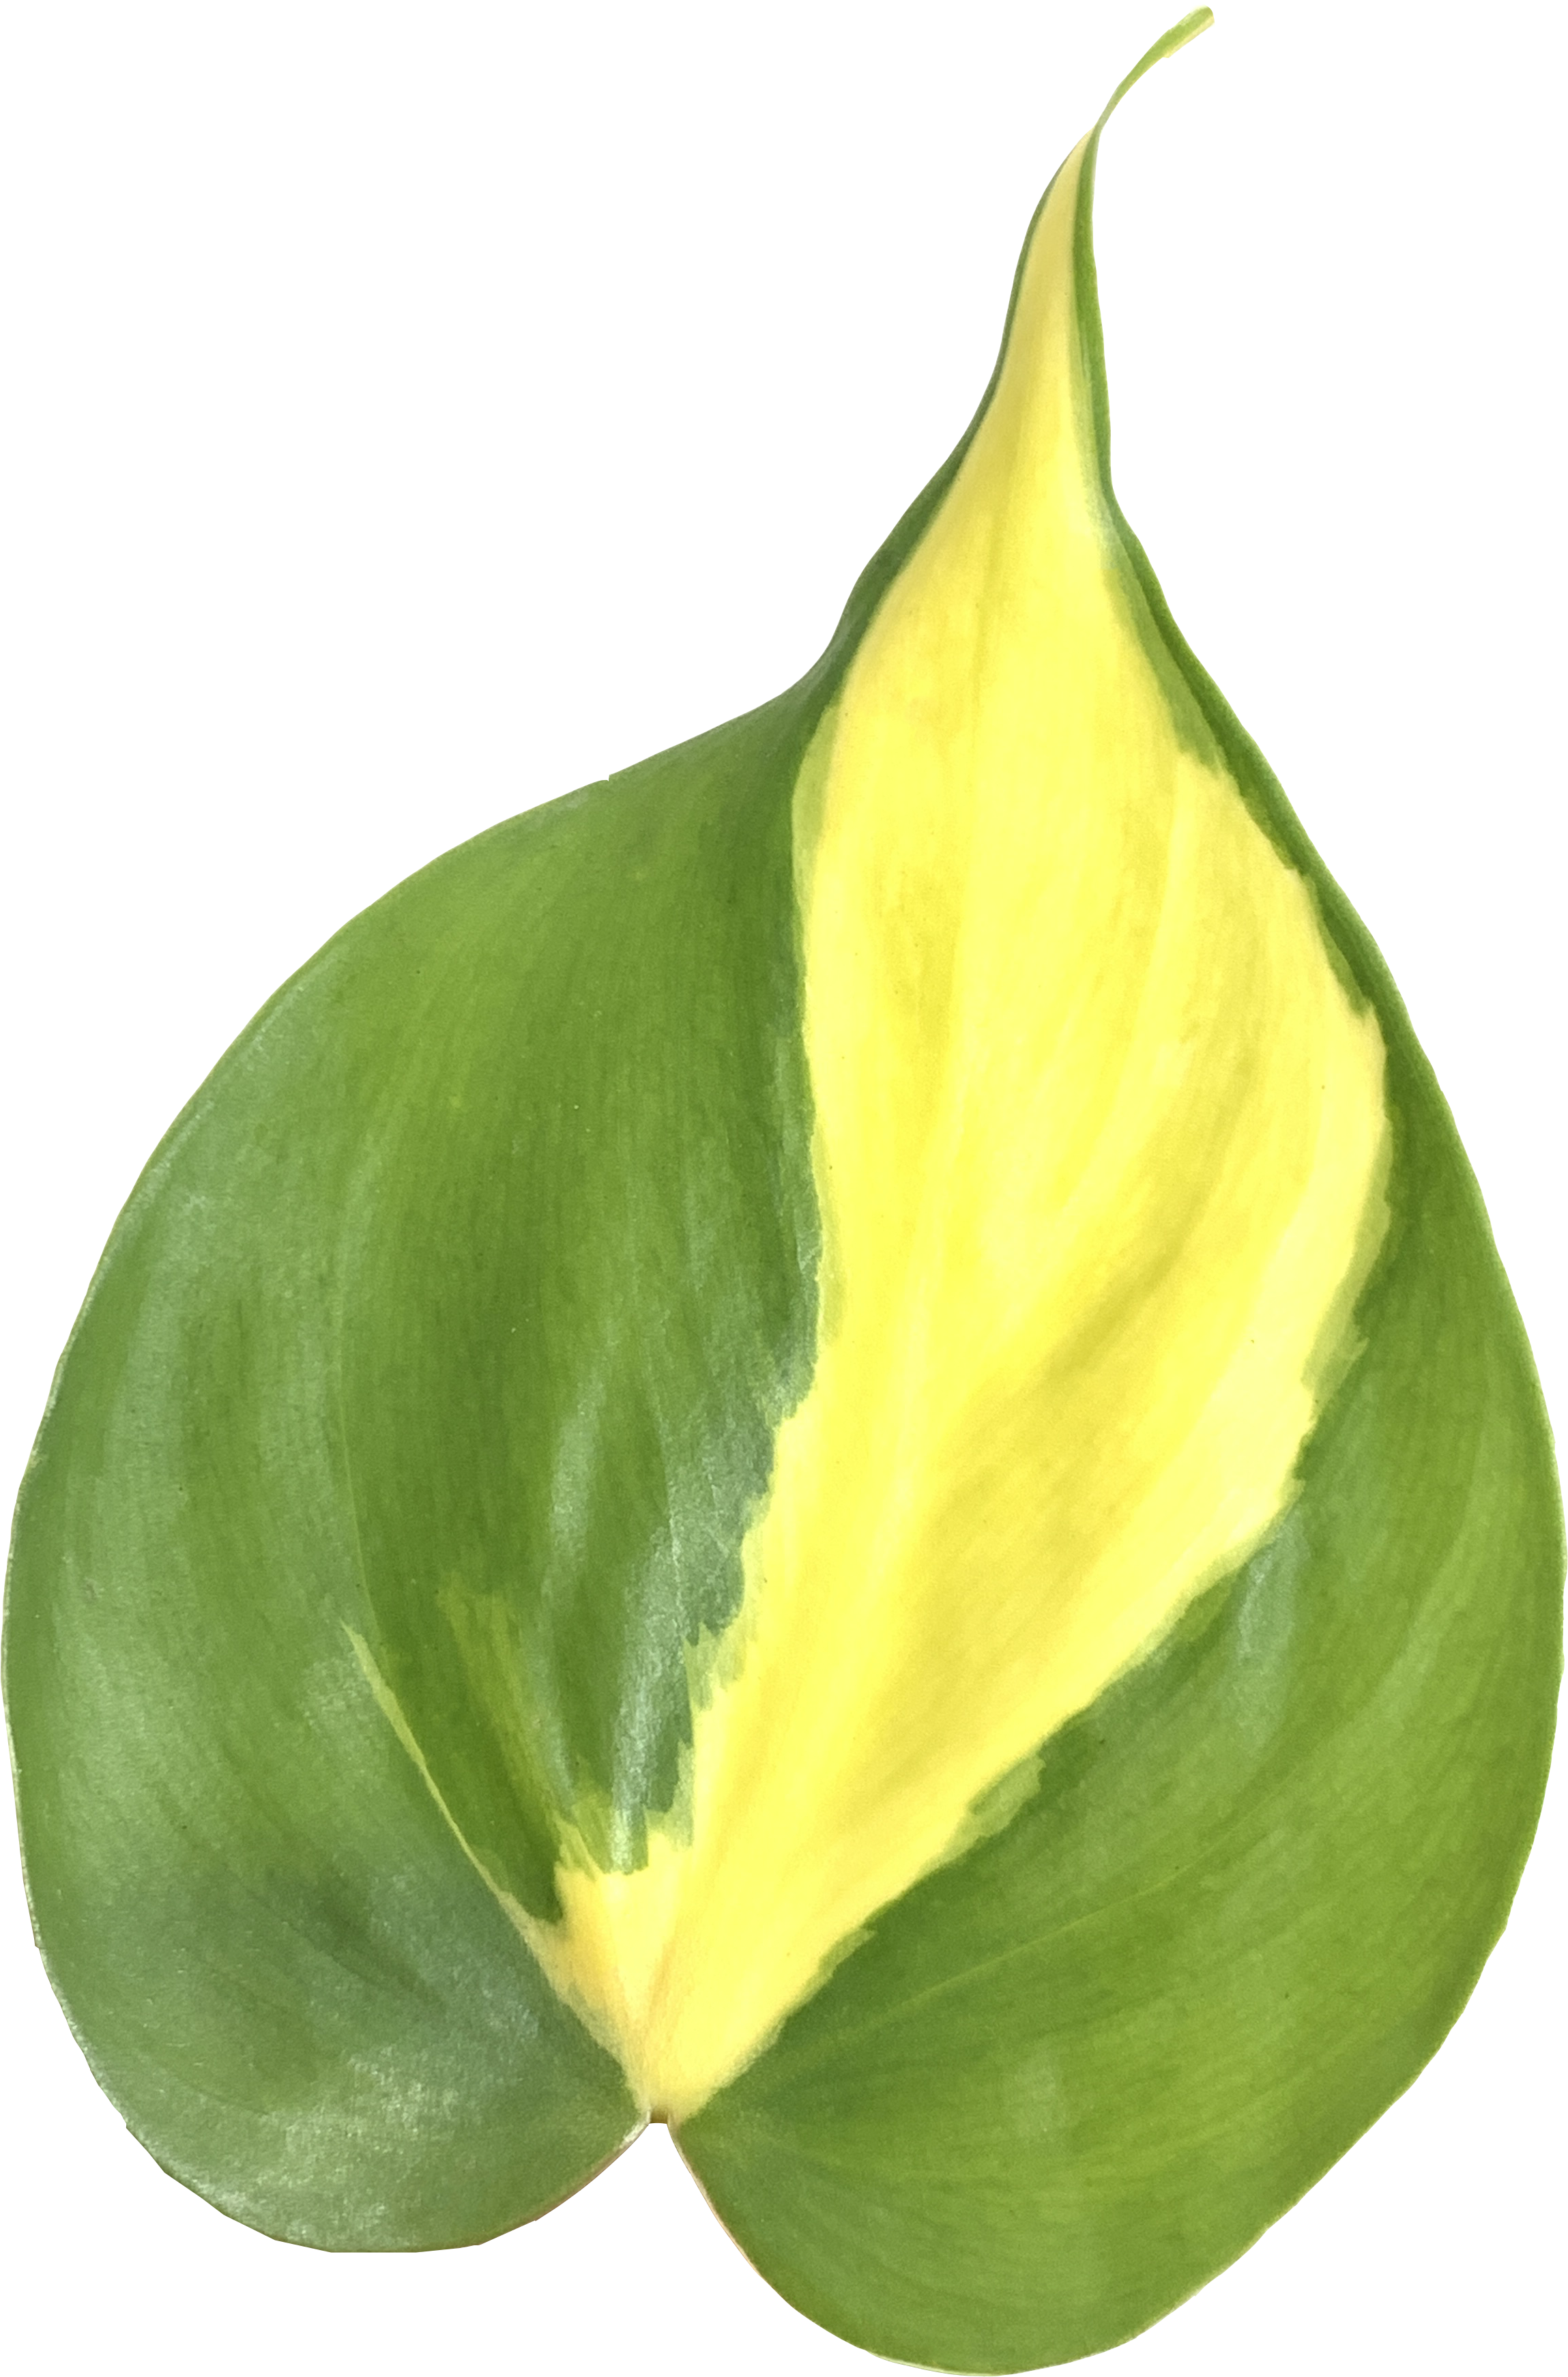 Philodendron Brasil, Philodendron Hederaceum